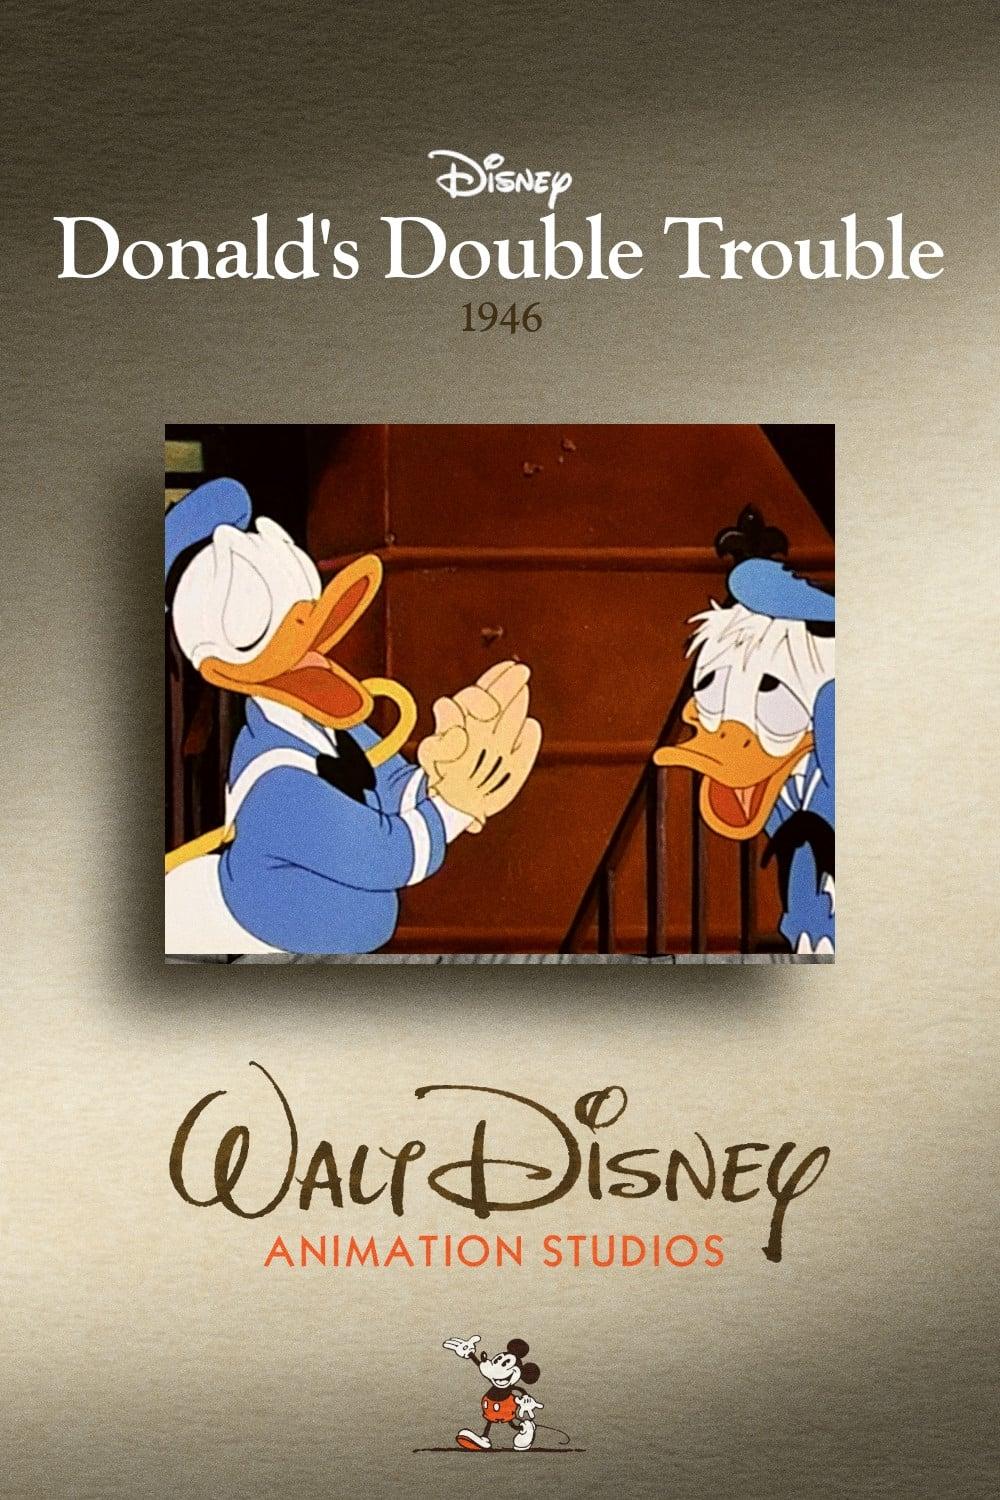 Donald's Double Trouble poster